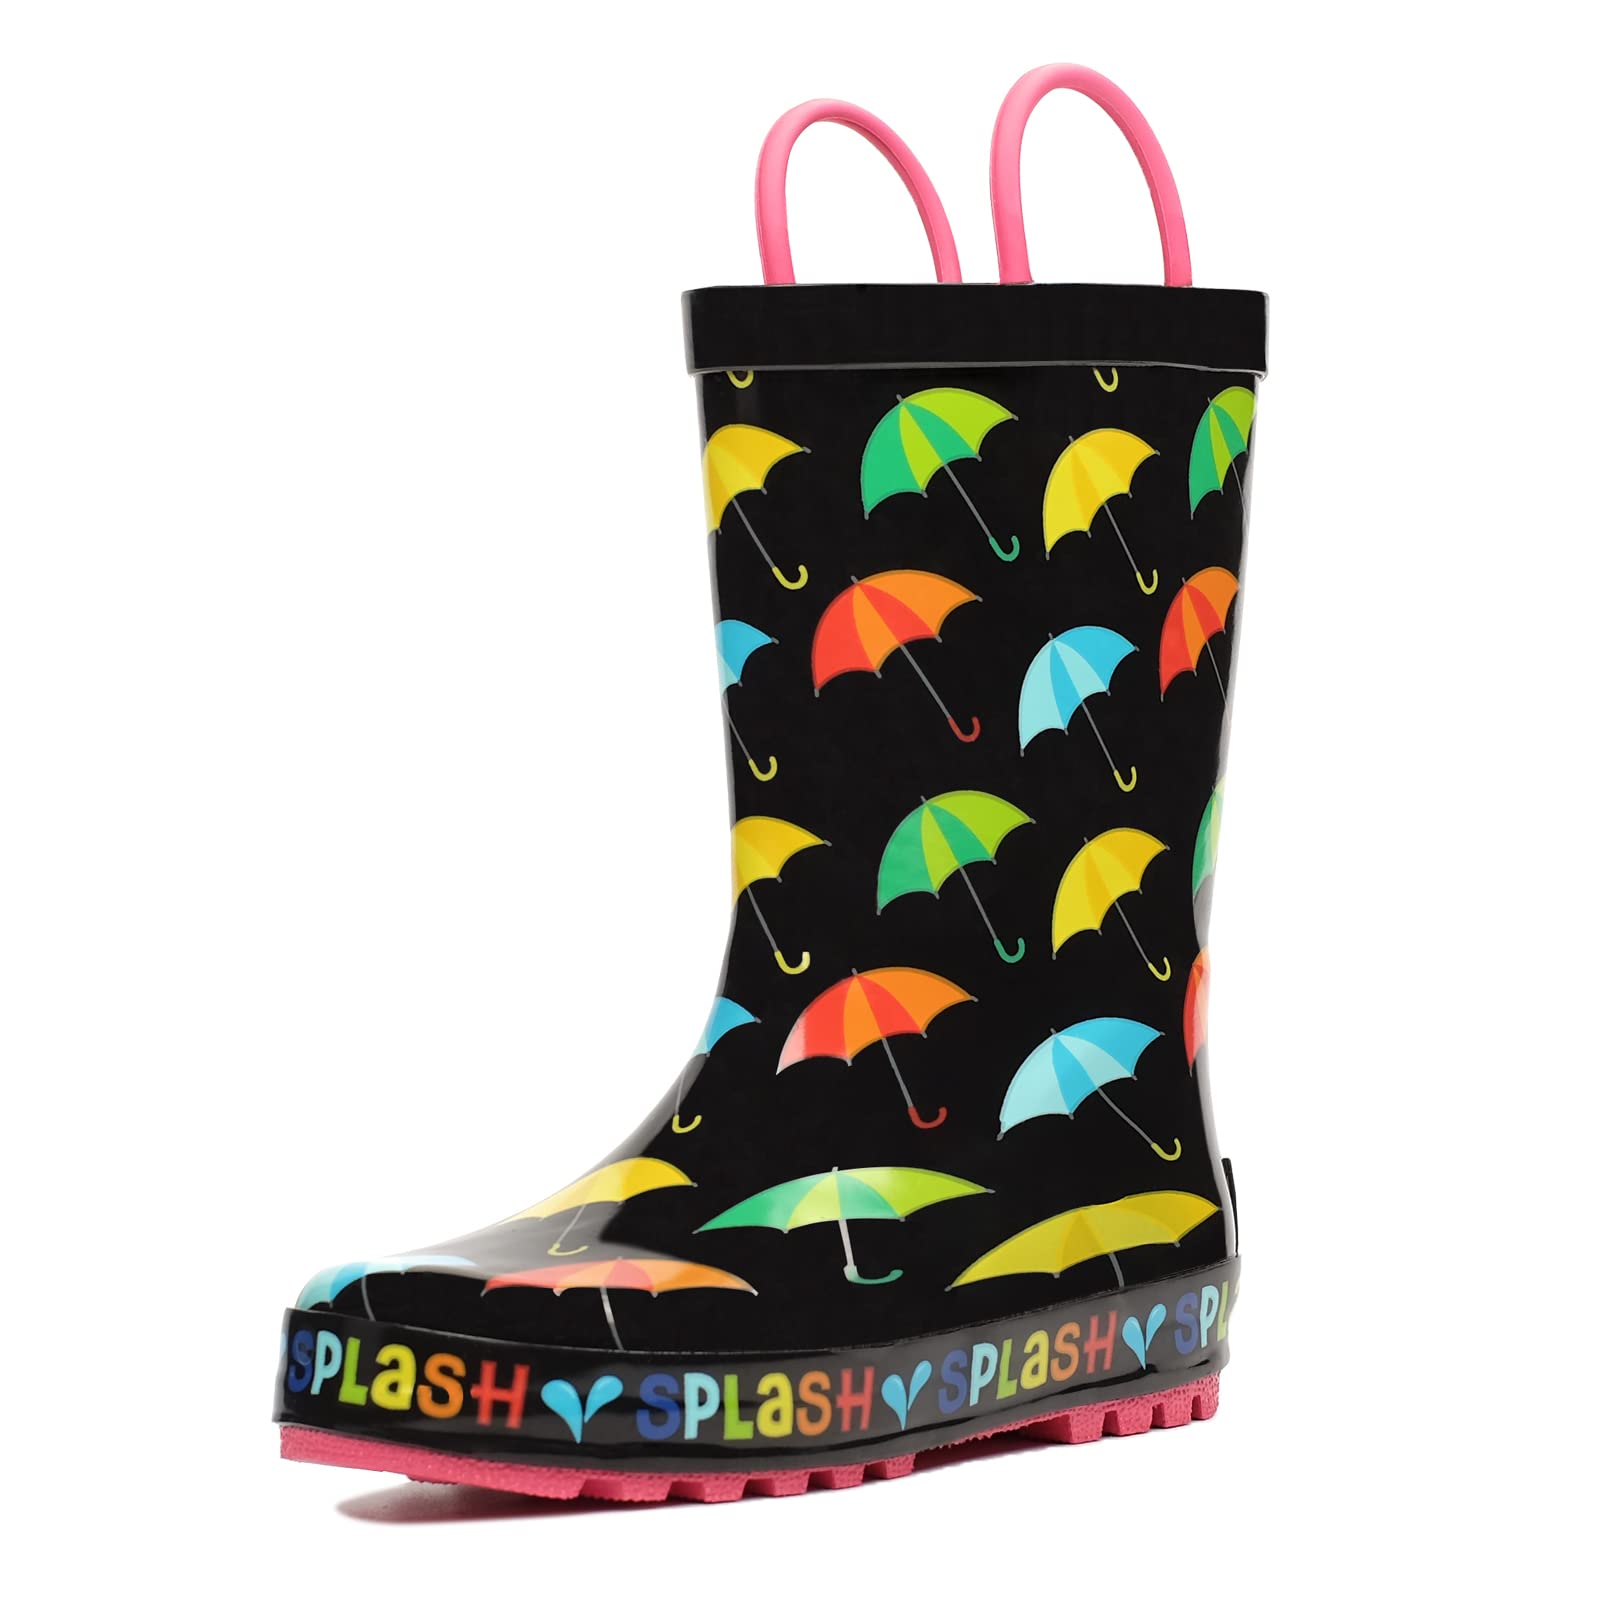 Landchief Toddler Rain Boots, Kids Rain Boots Waterproof Rubber Boots For Girls And Boys With Fun Patterns And Easy-On Handles,